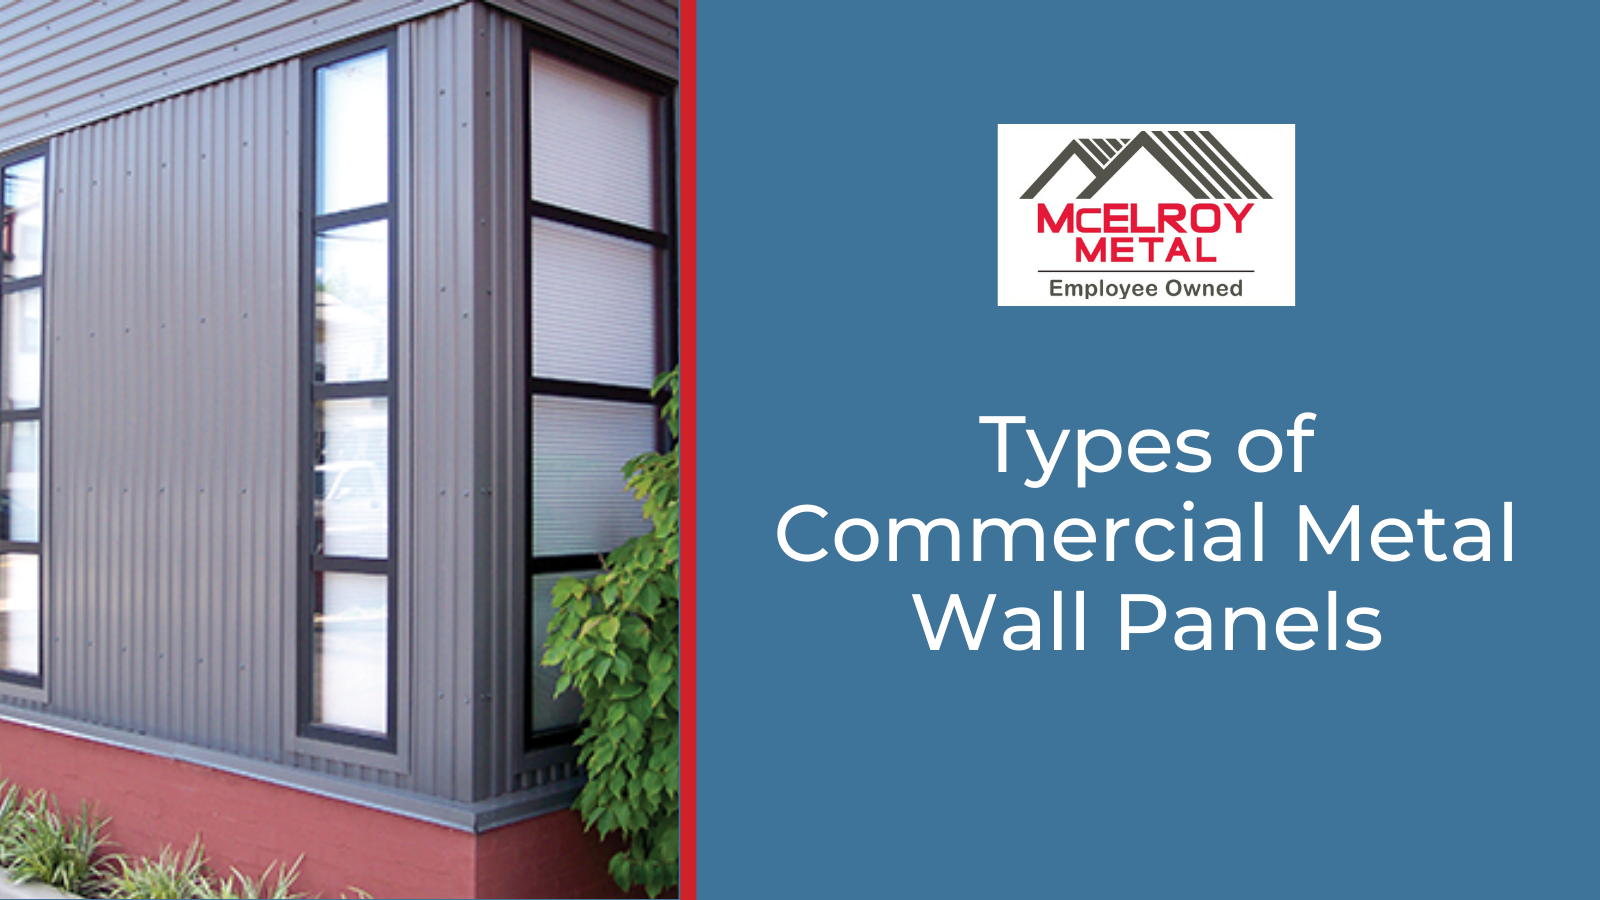 Types of Commercial Metal Wall Panels